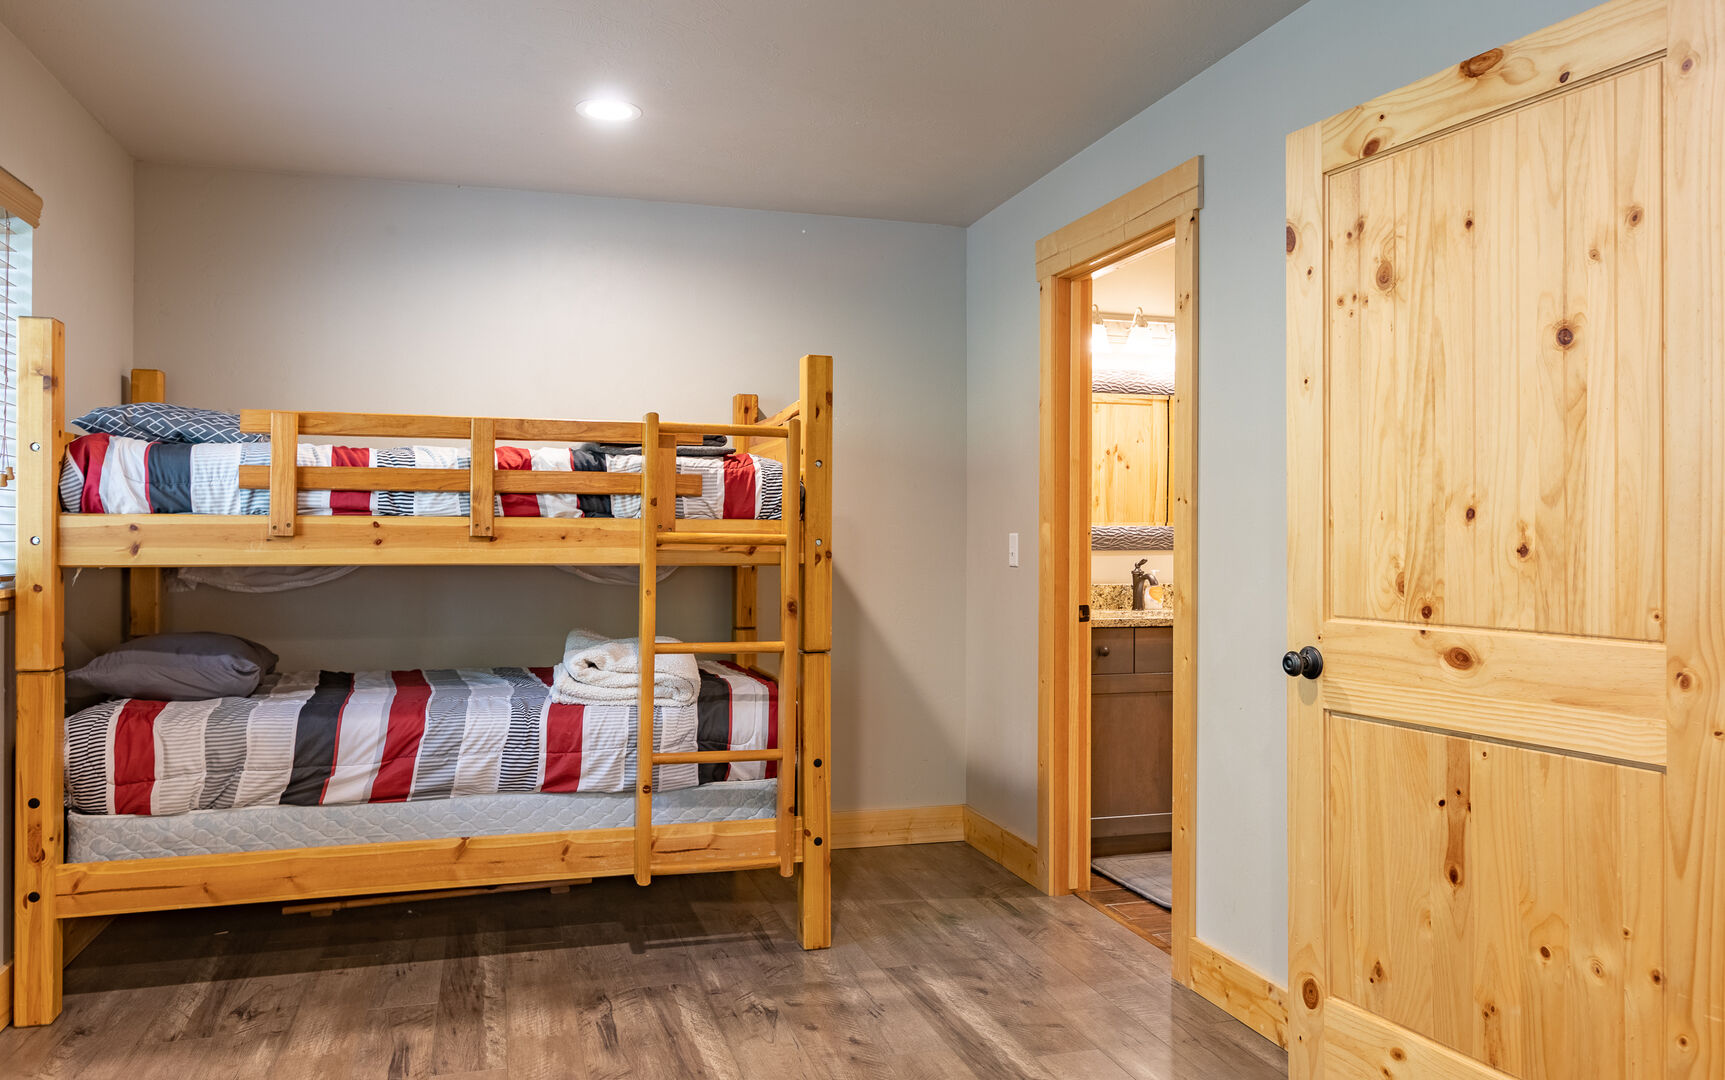 Buck Buck Moose ~ Bedroom #8 on upper level w/ single over single and double over double bunk beds w/ private entrance to shared bathroom